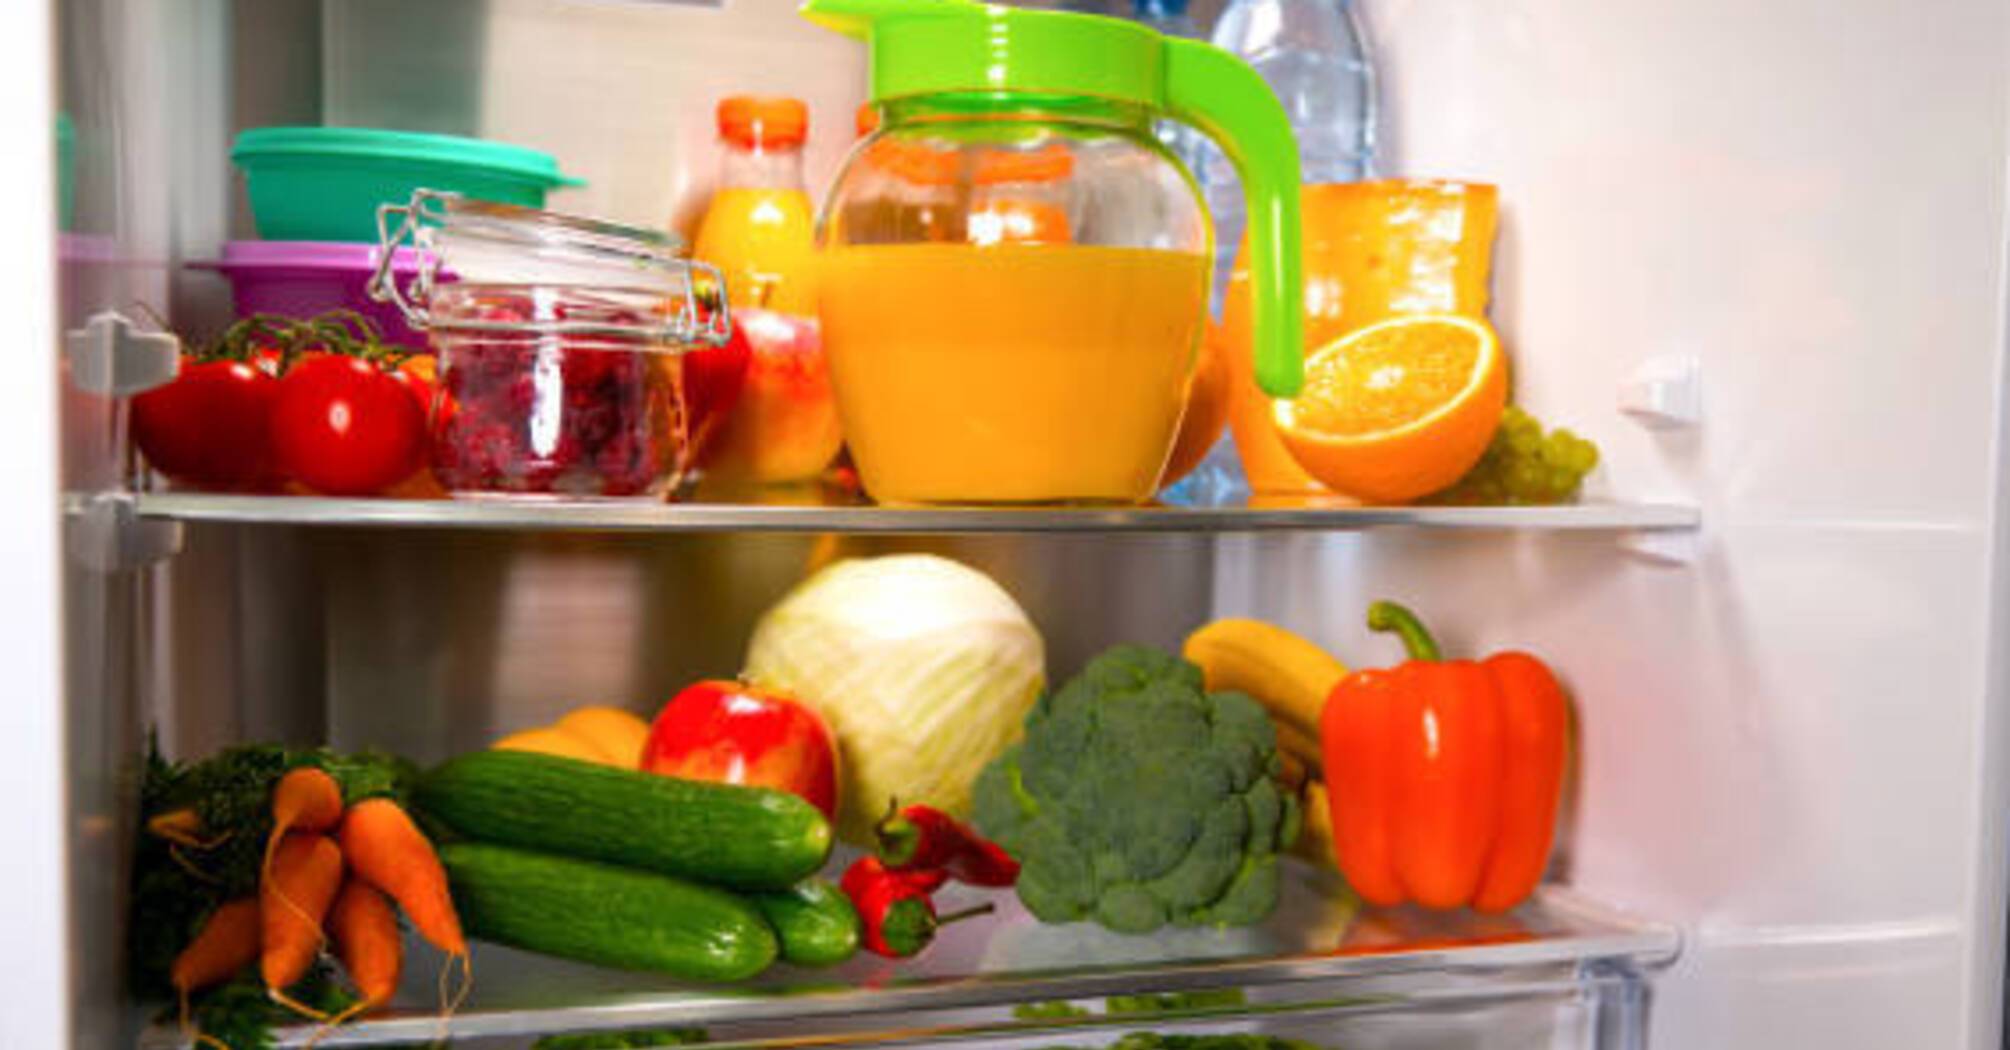 Products that should always be in the refrigerator